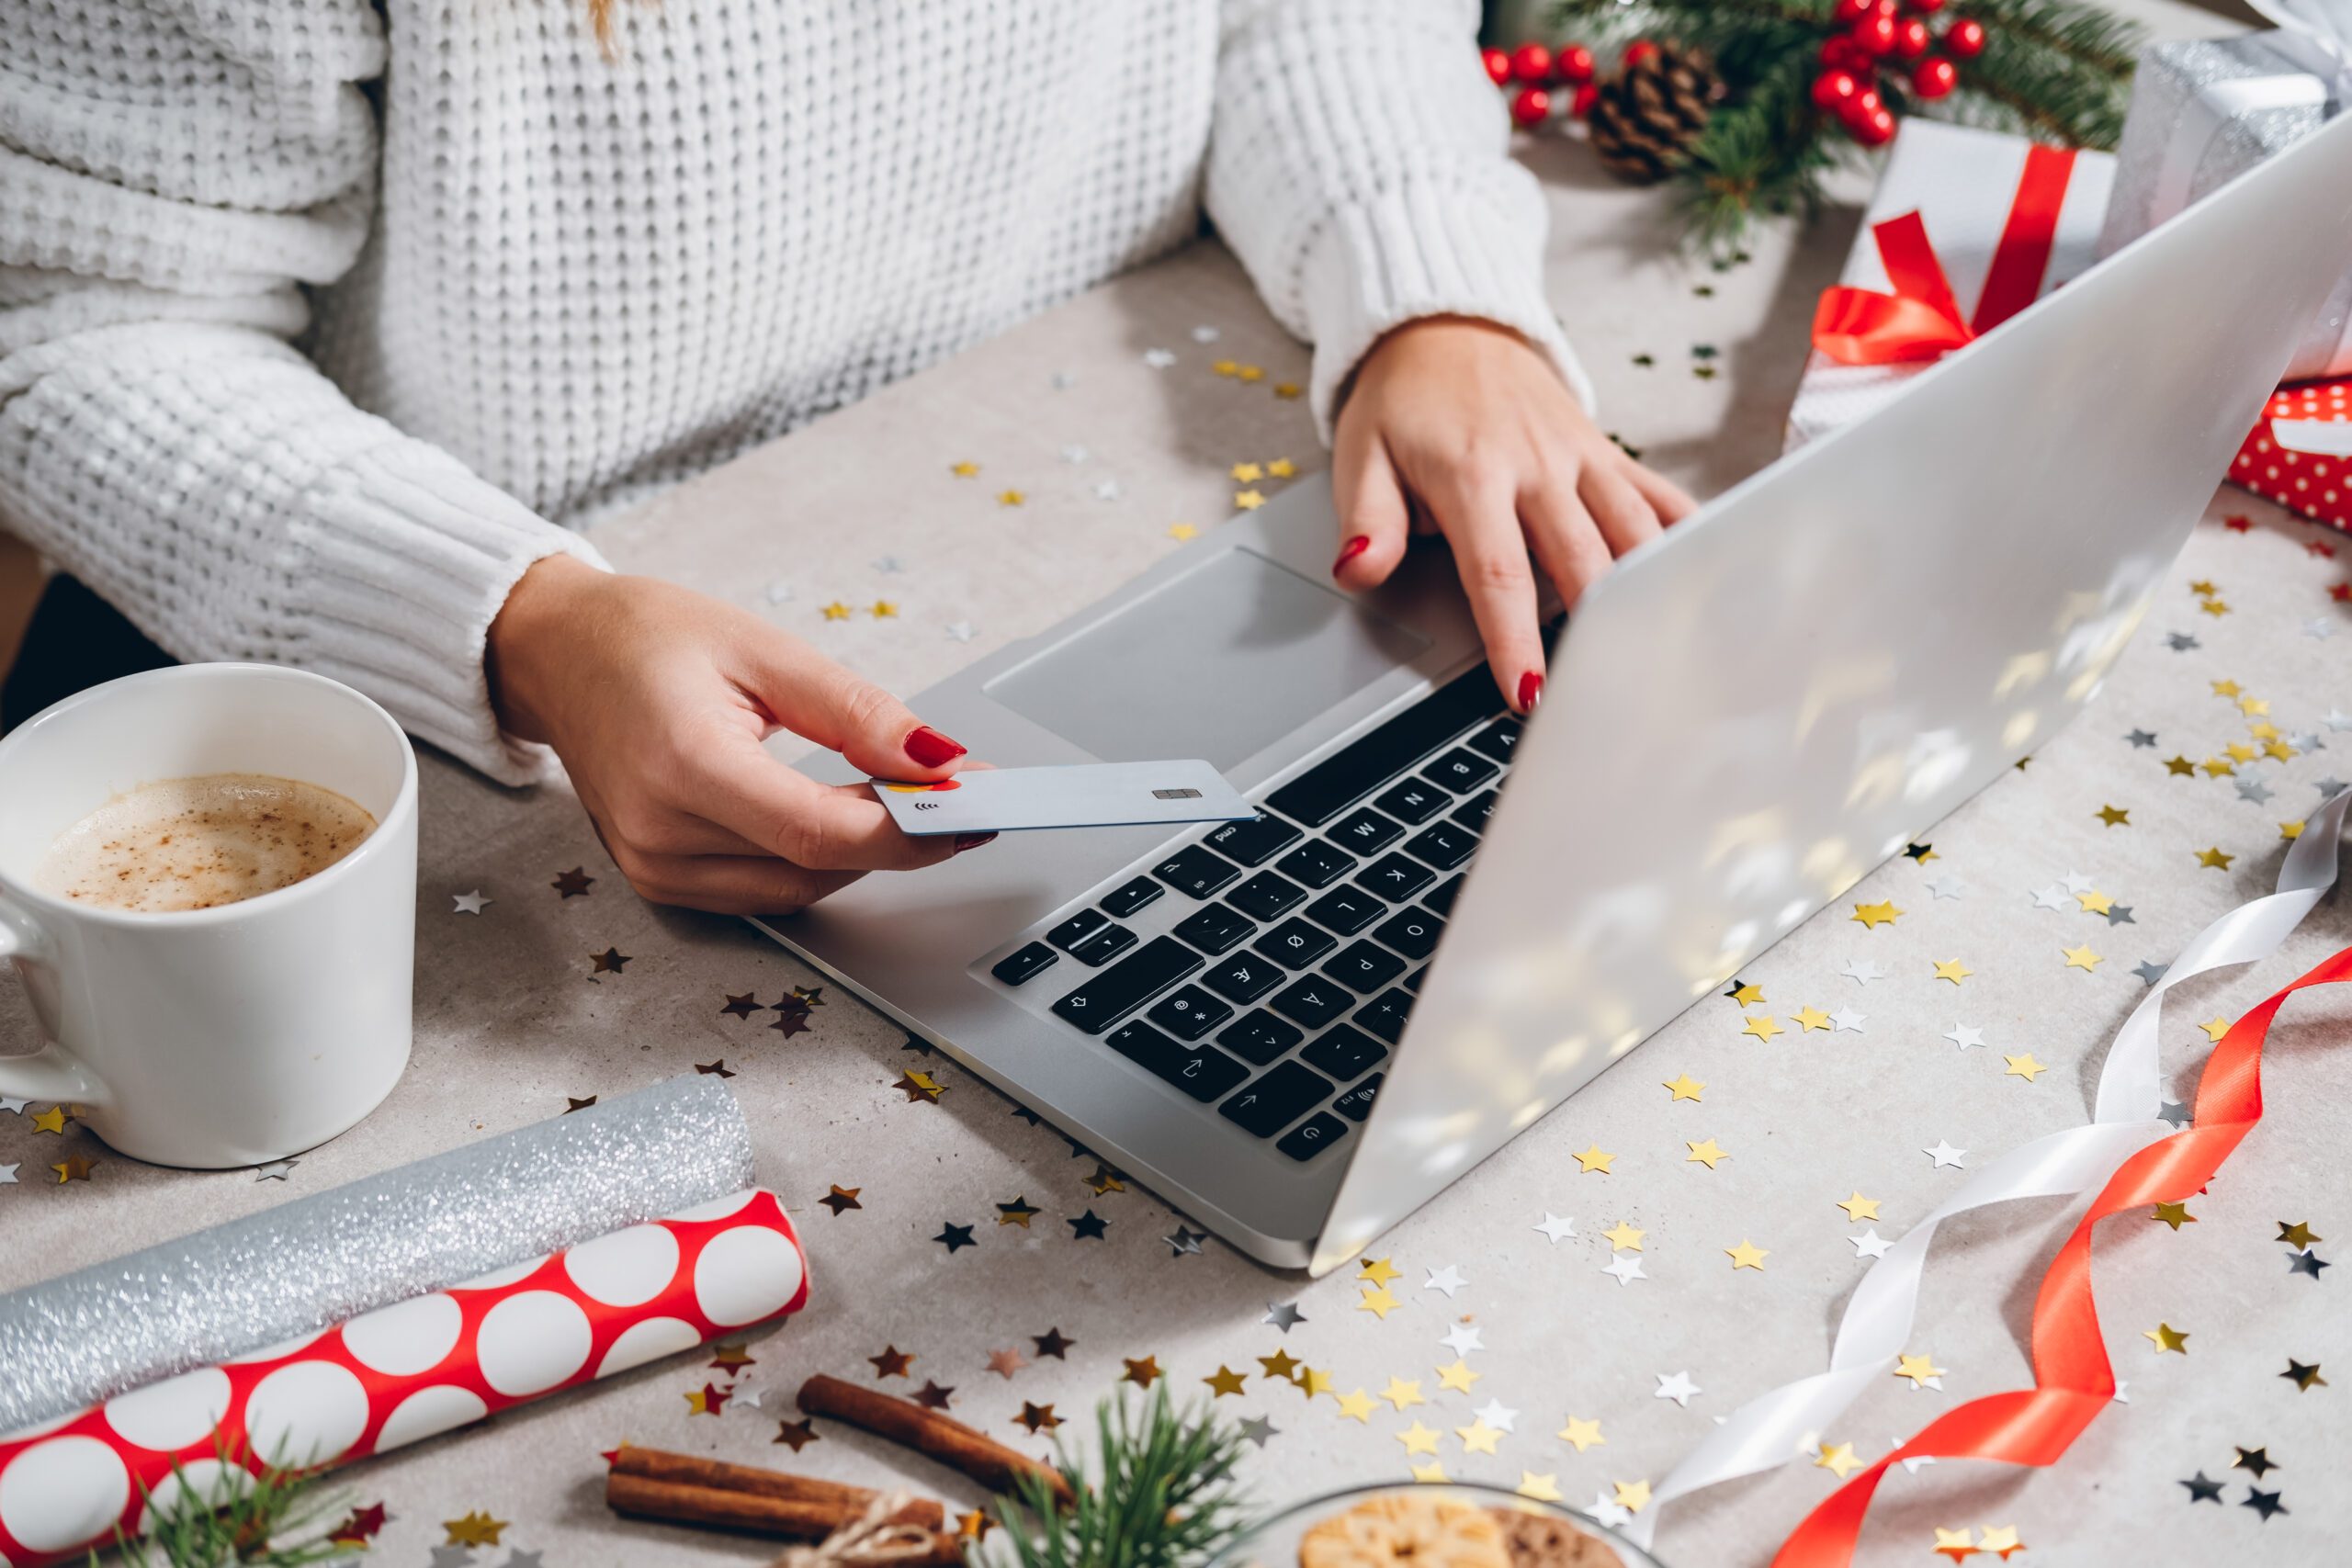 How to Survive the Post-Holiday Ecommerce Slump